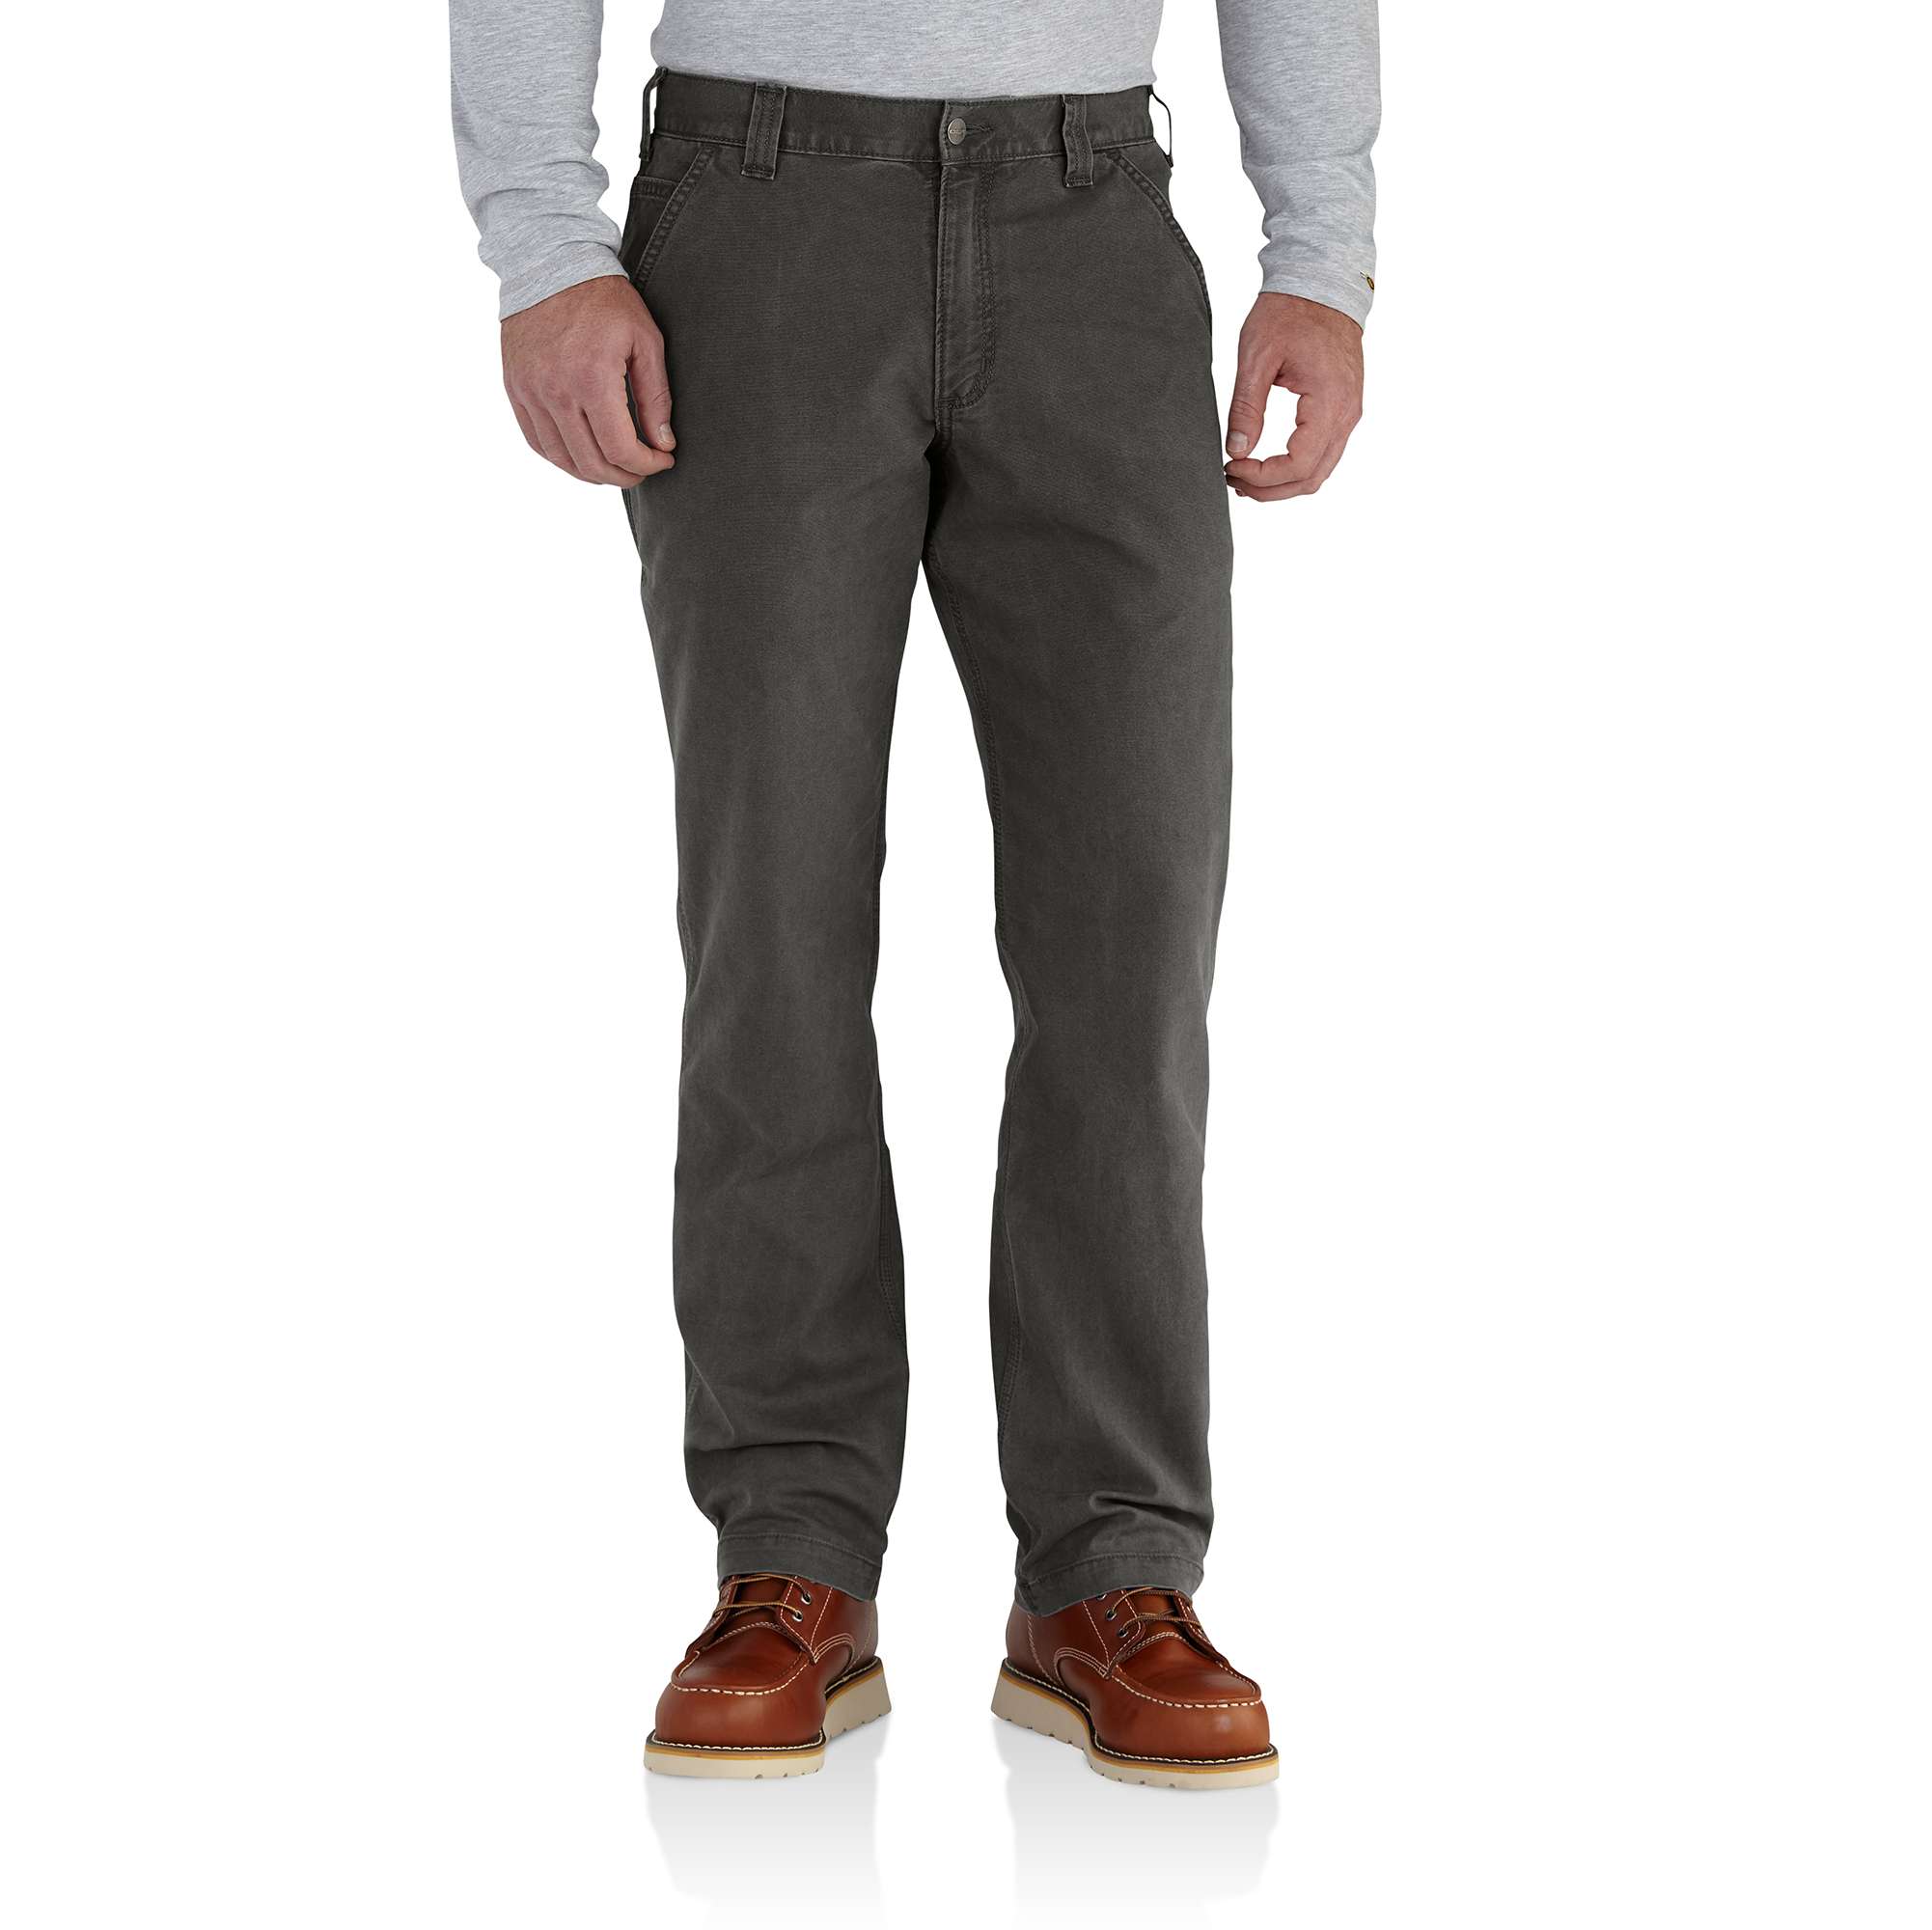 Carhartt Men's Relaxed Fit Peat Canvas Work Pants (34 X 34) in the